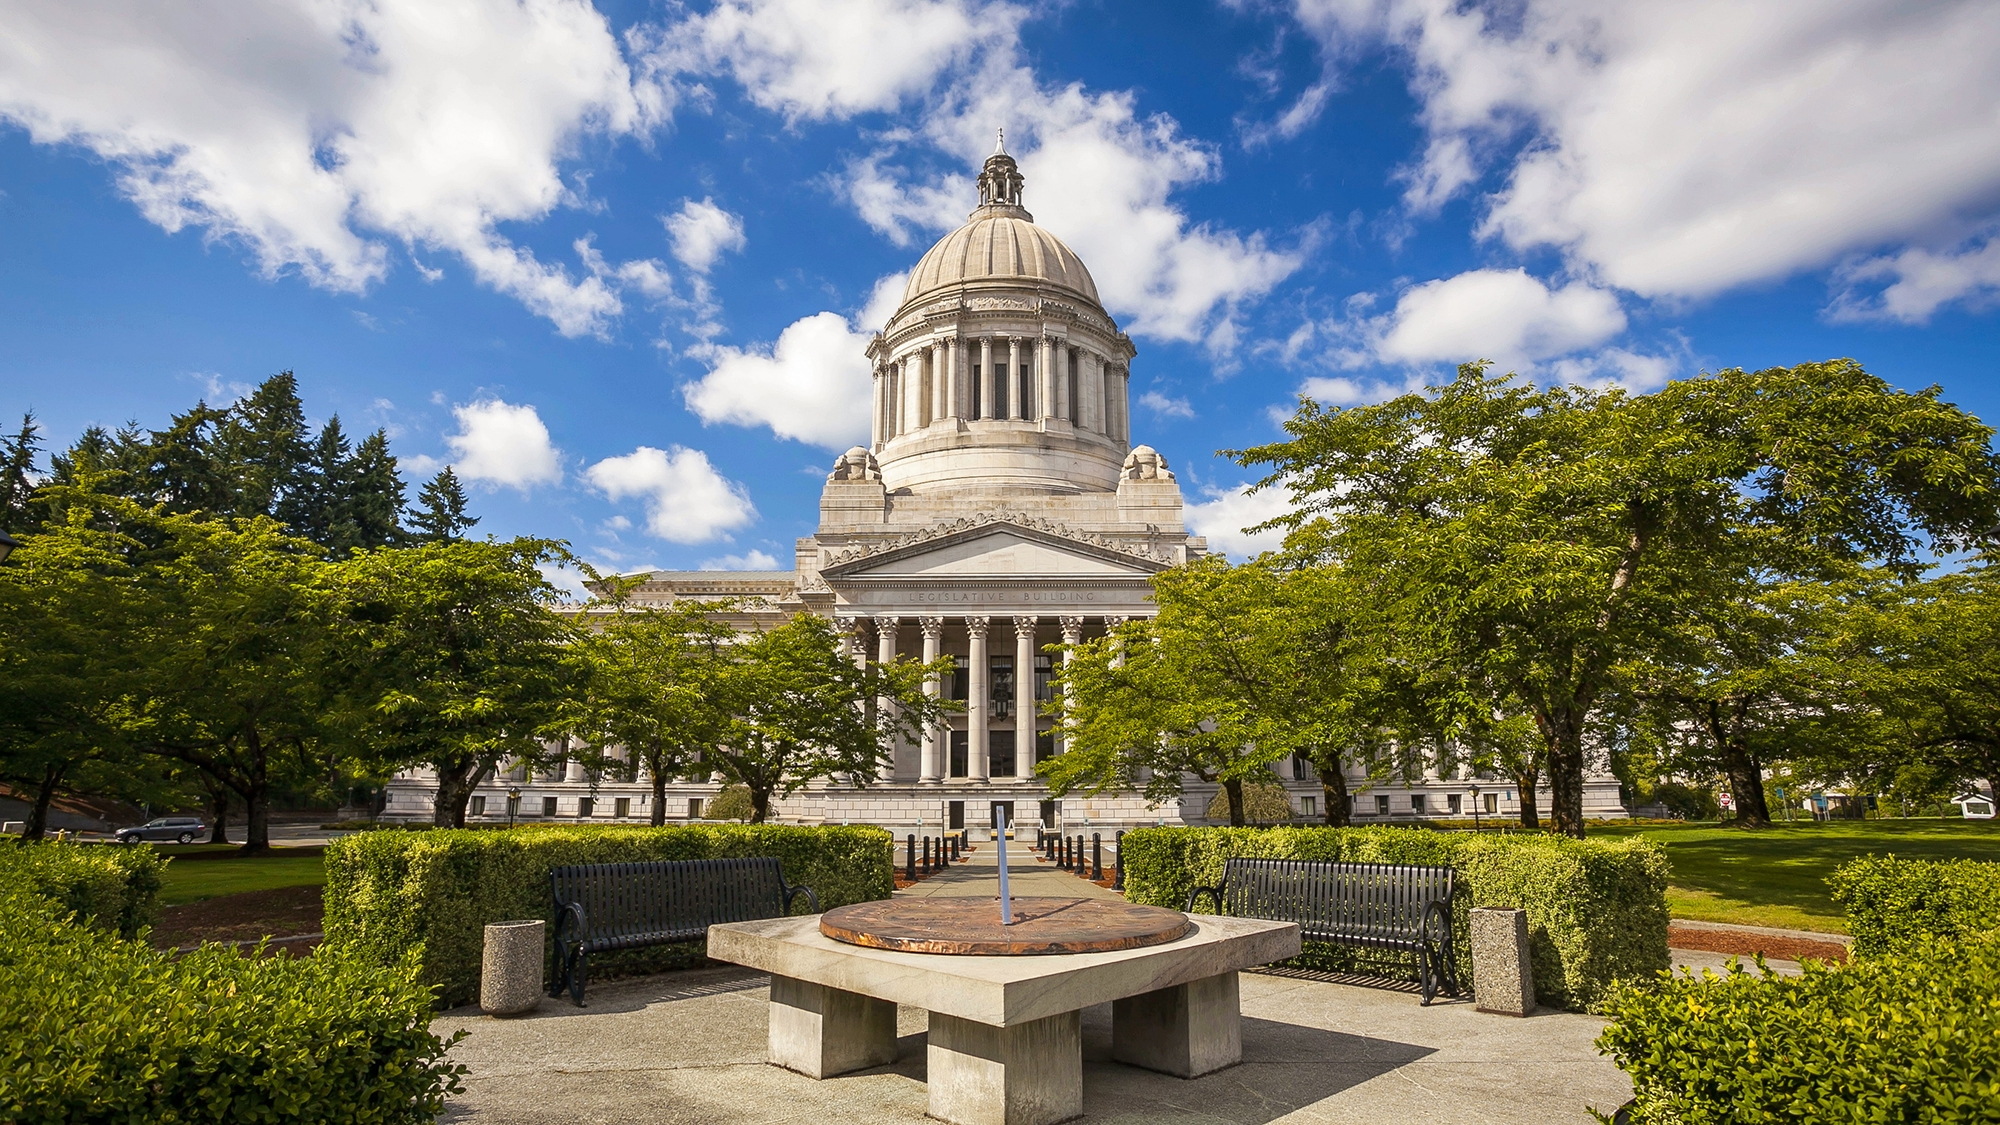 View of Washington state's State Capitol in Olympia